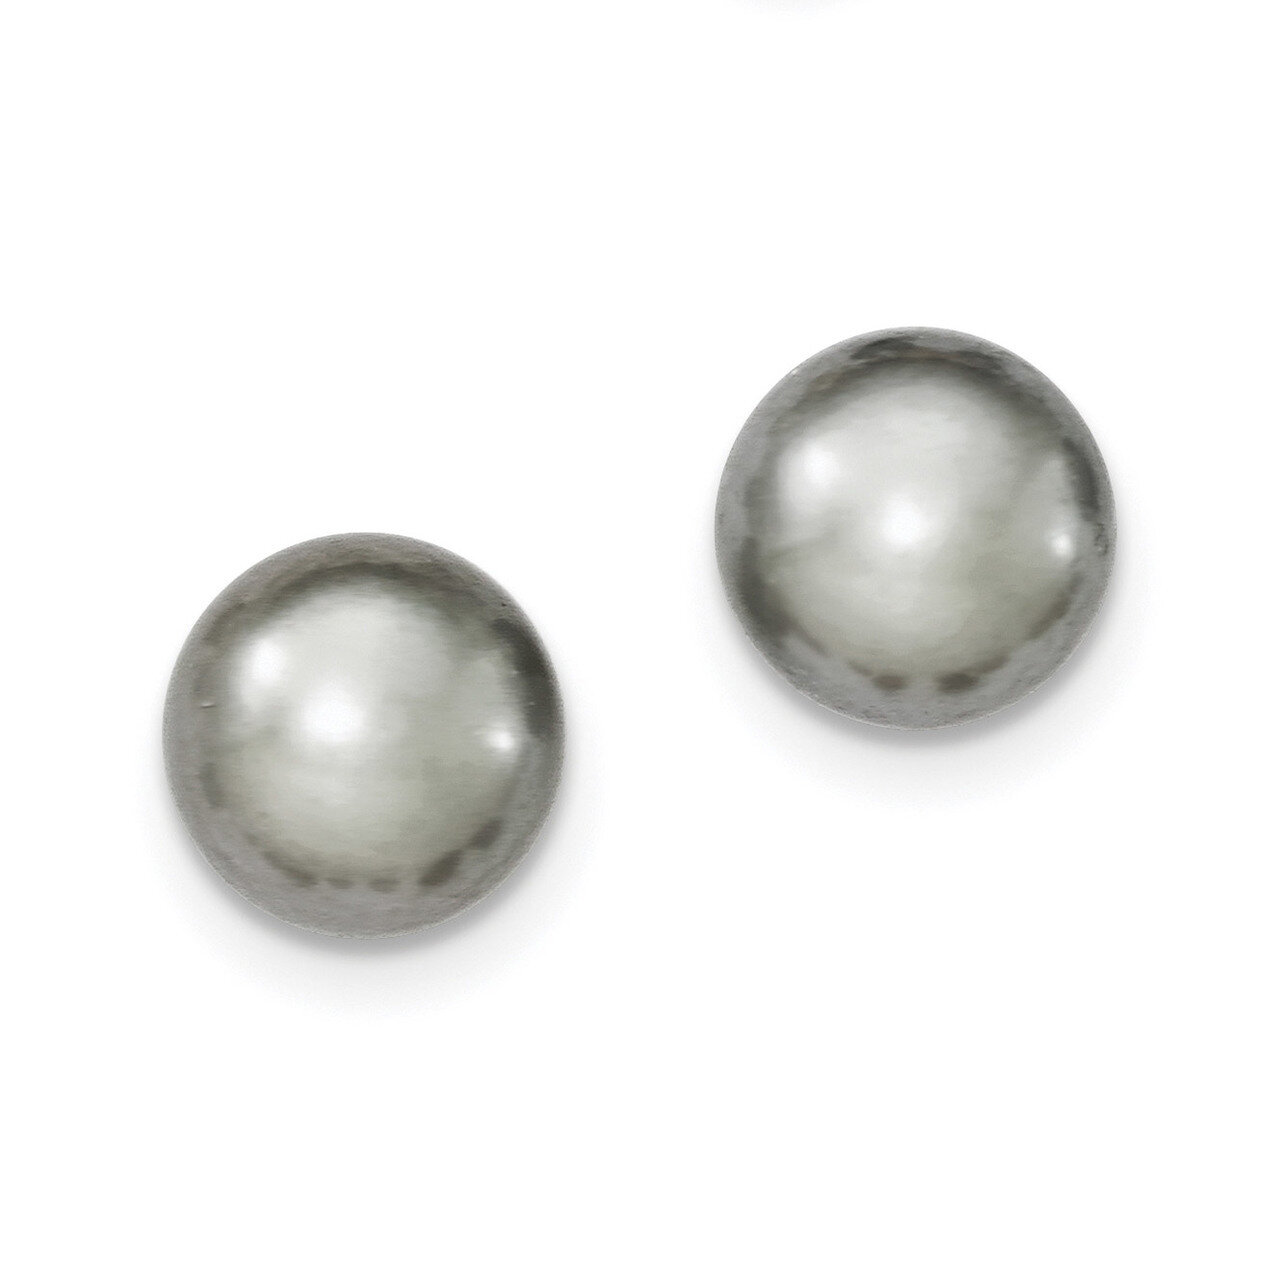 11-12mm Grey Freshwater Cultured Button Pearl Stud Earrings Sterling Silver QE12680